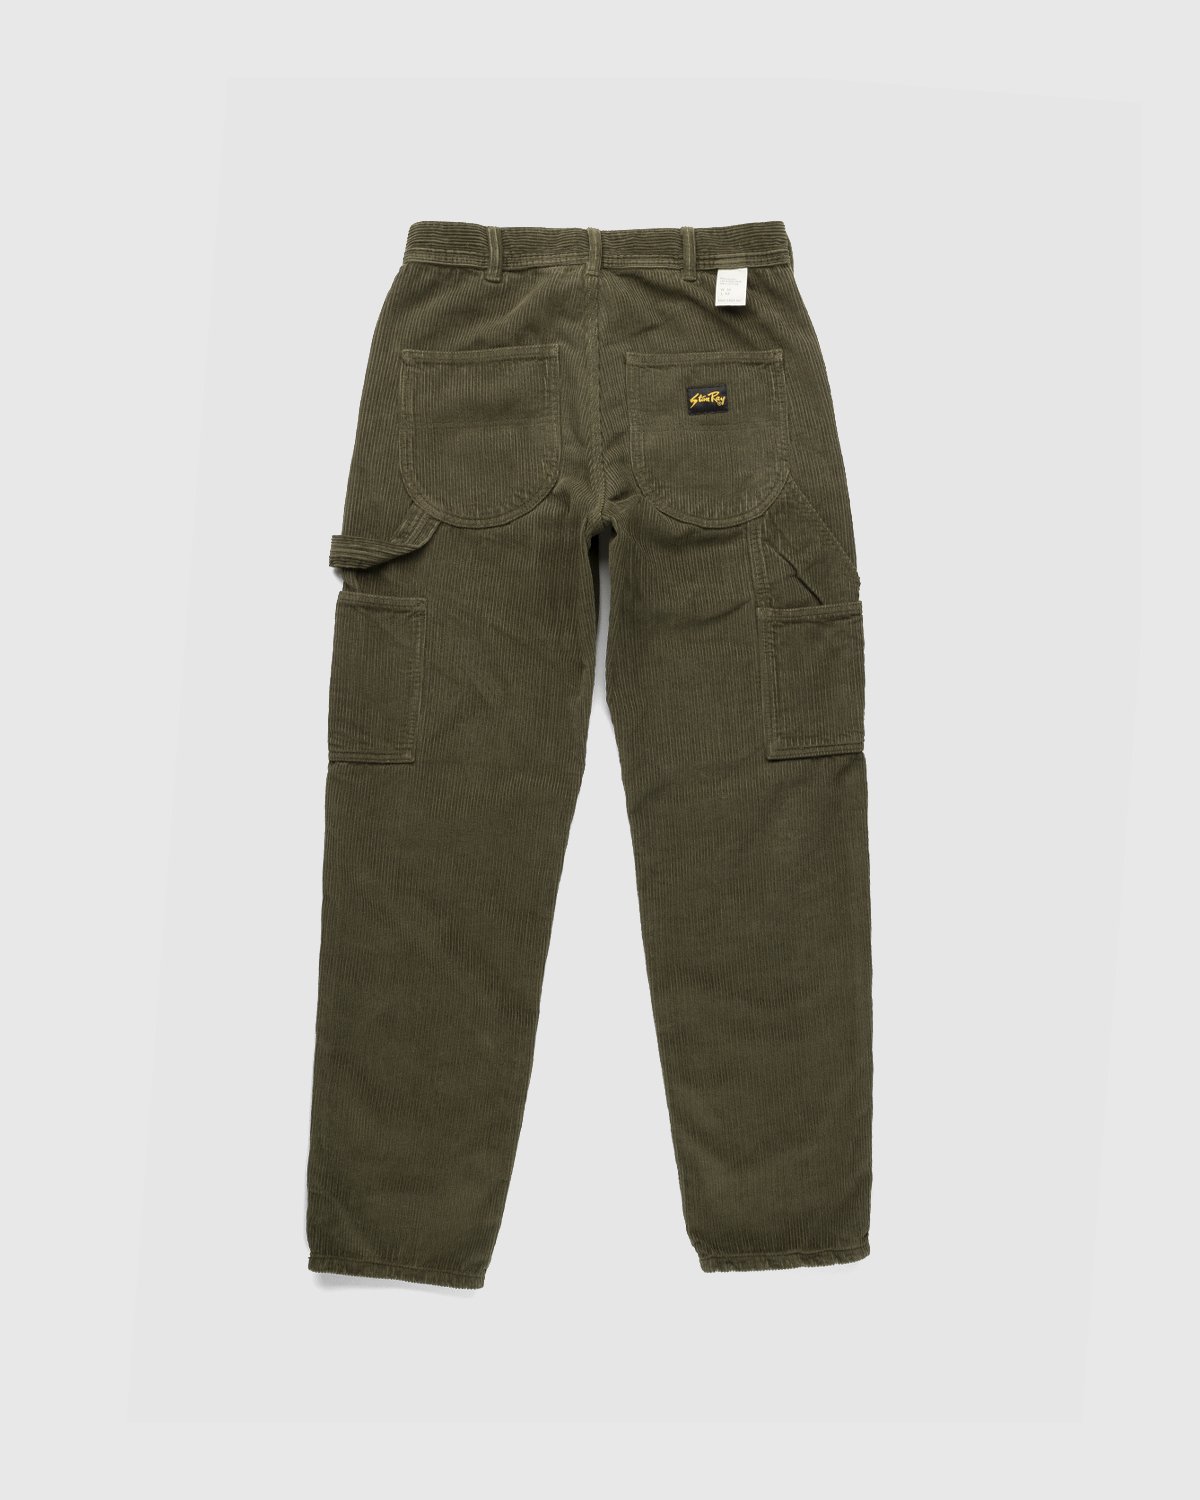 Stan Ray - 80s Painter Pant Olive Cord - Clothing - Green - Image 2